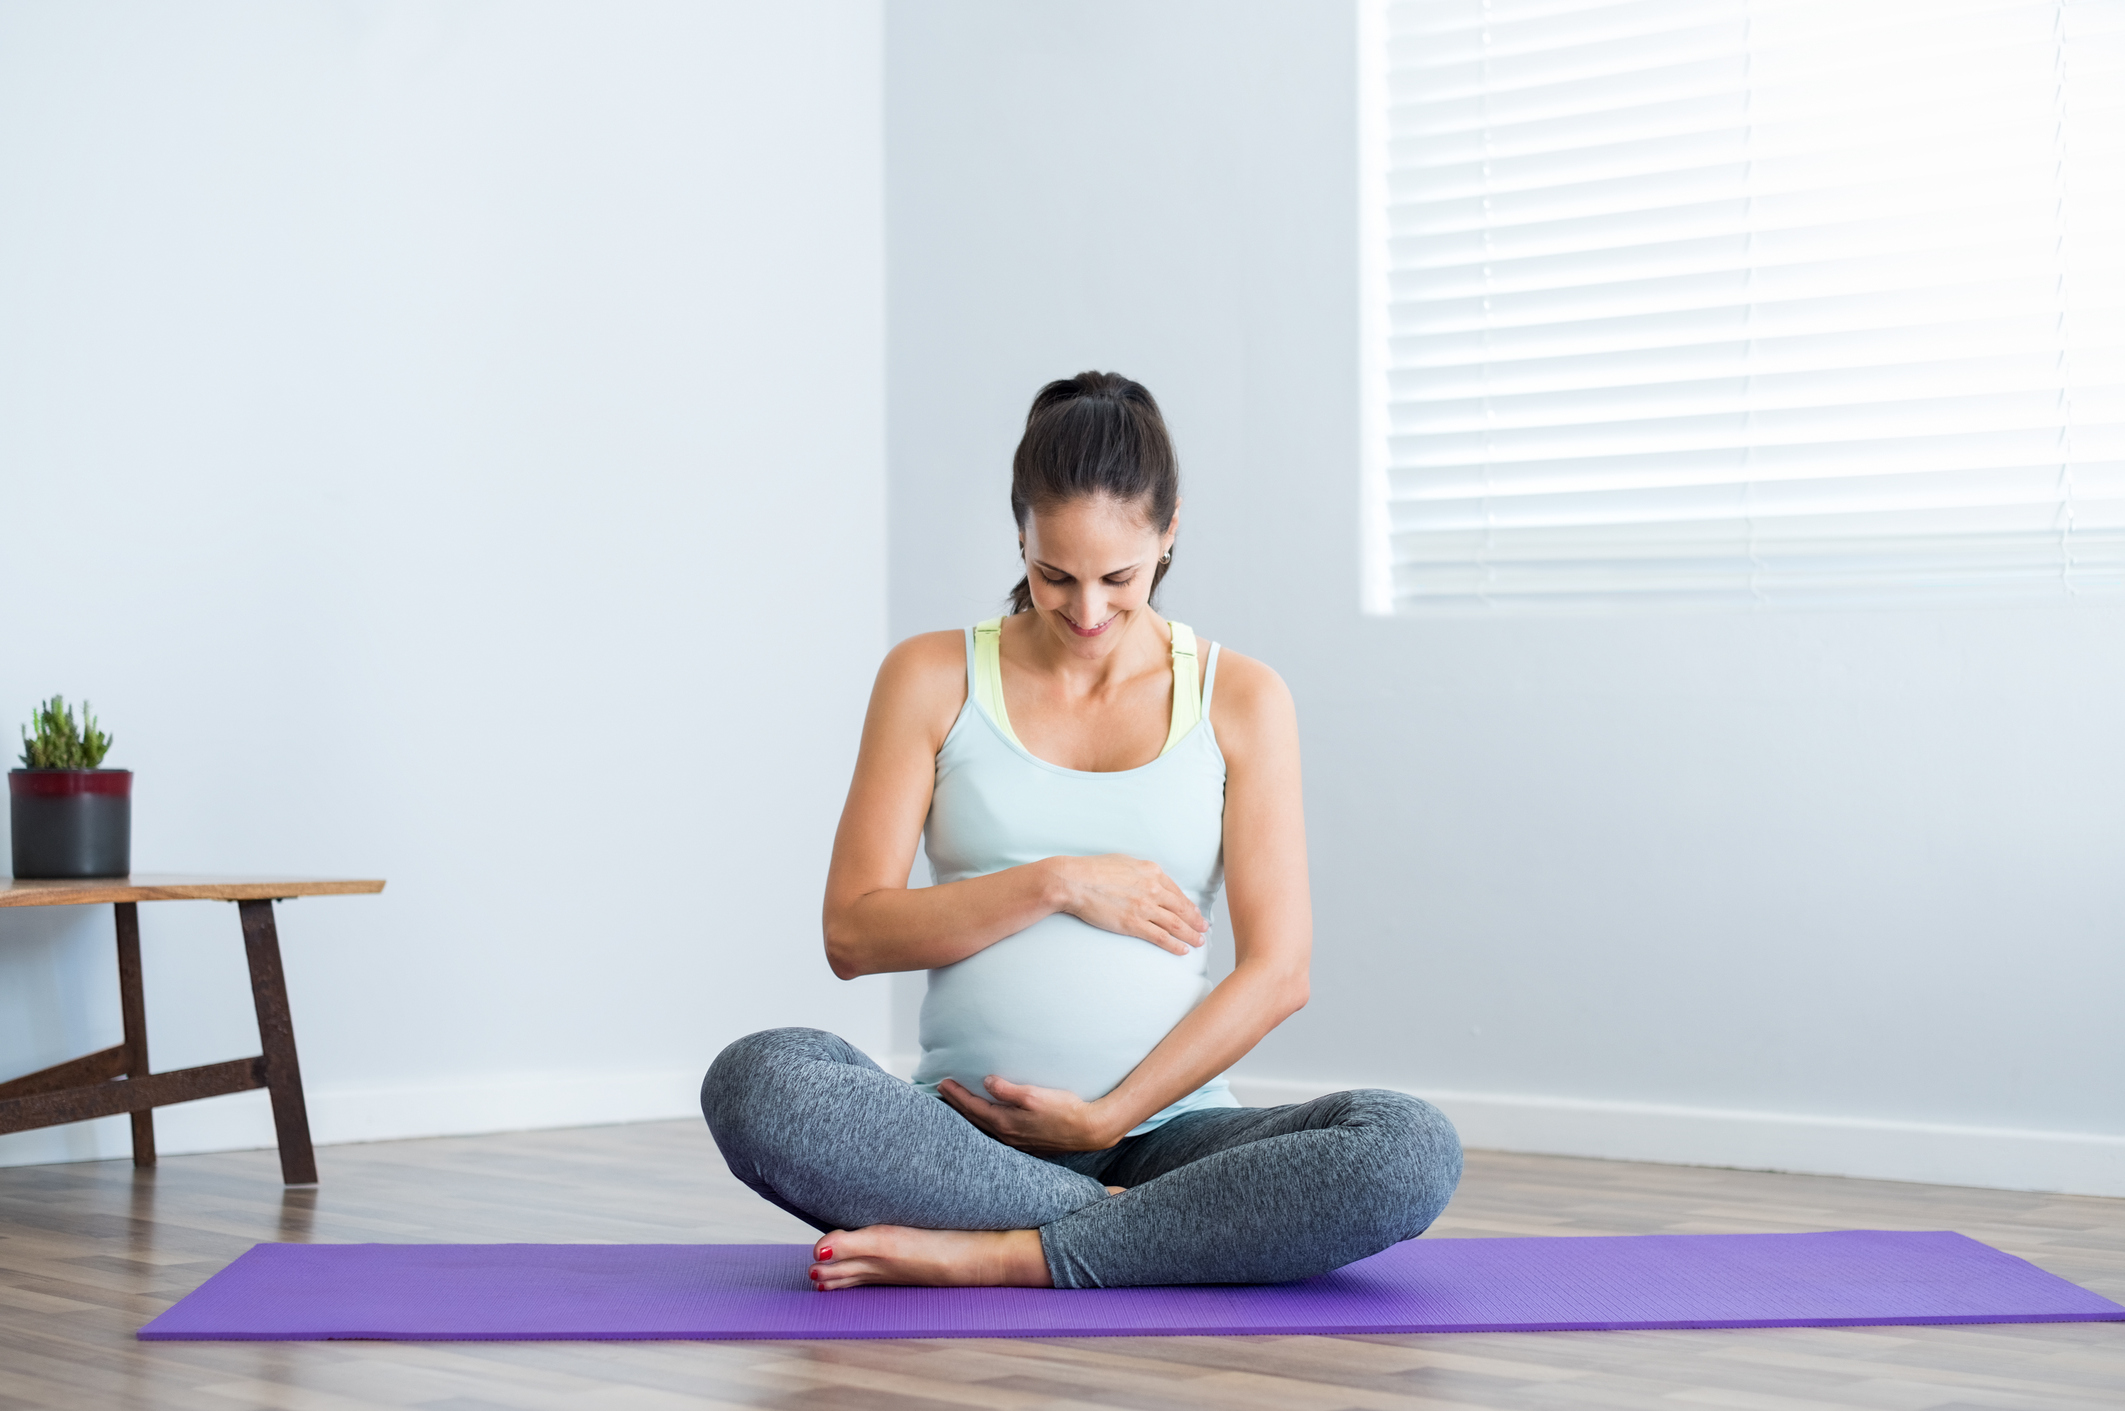 A preganant woman sitting on a purple yoga mat holding her belly with both hands